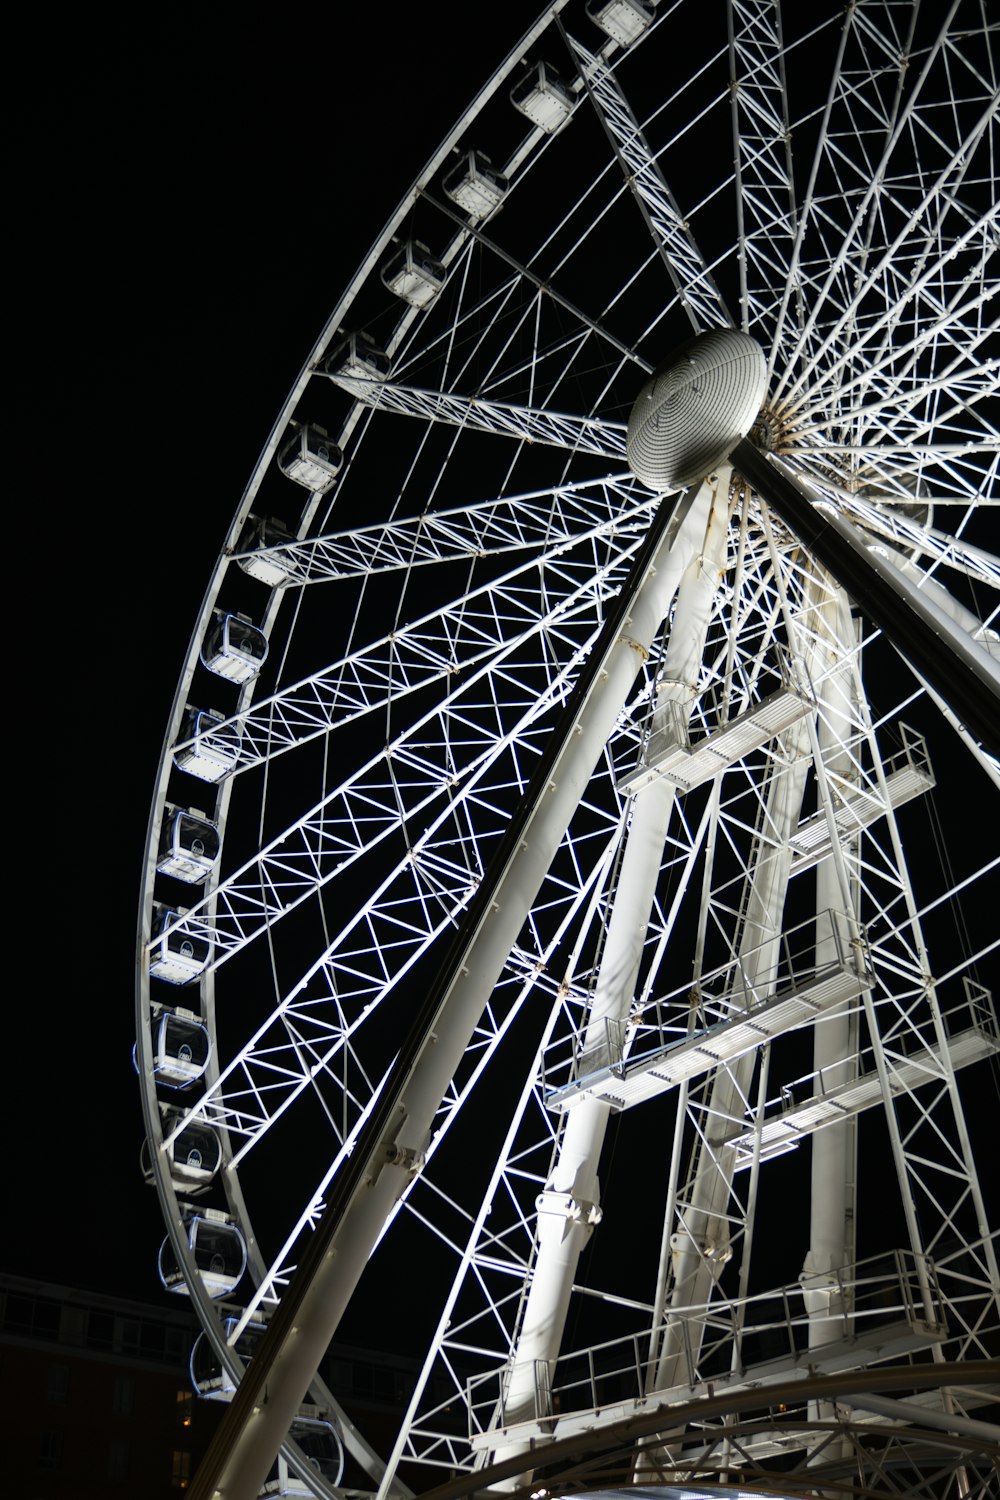 a ferris wheel lit up at night time